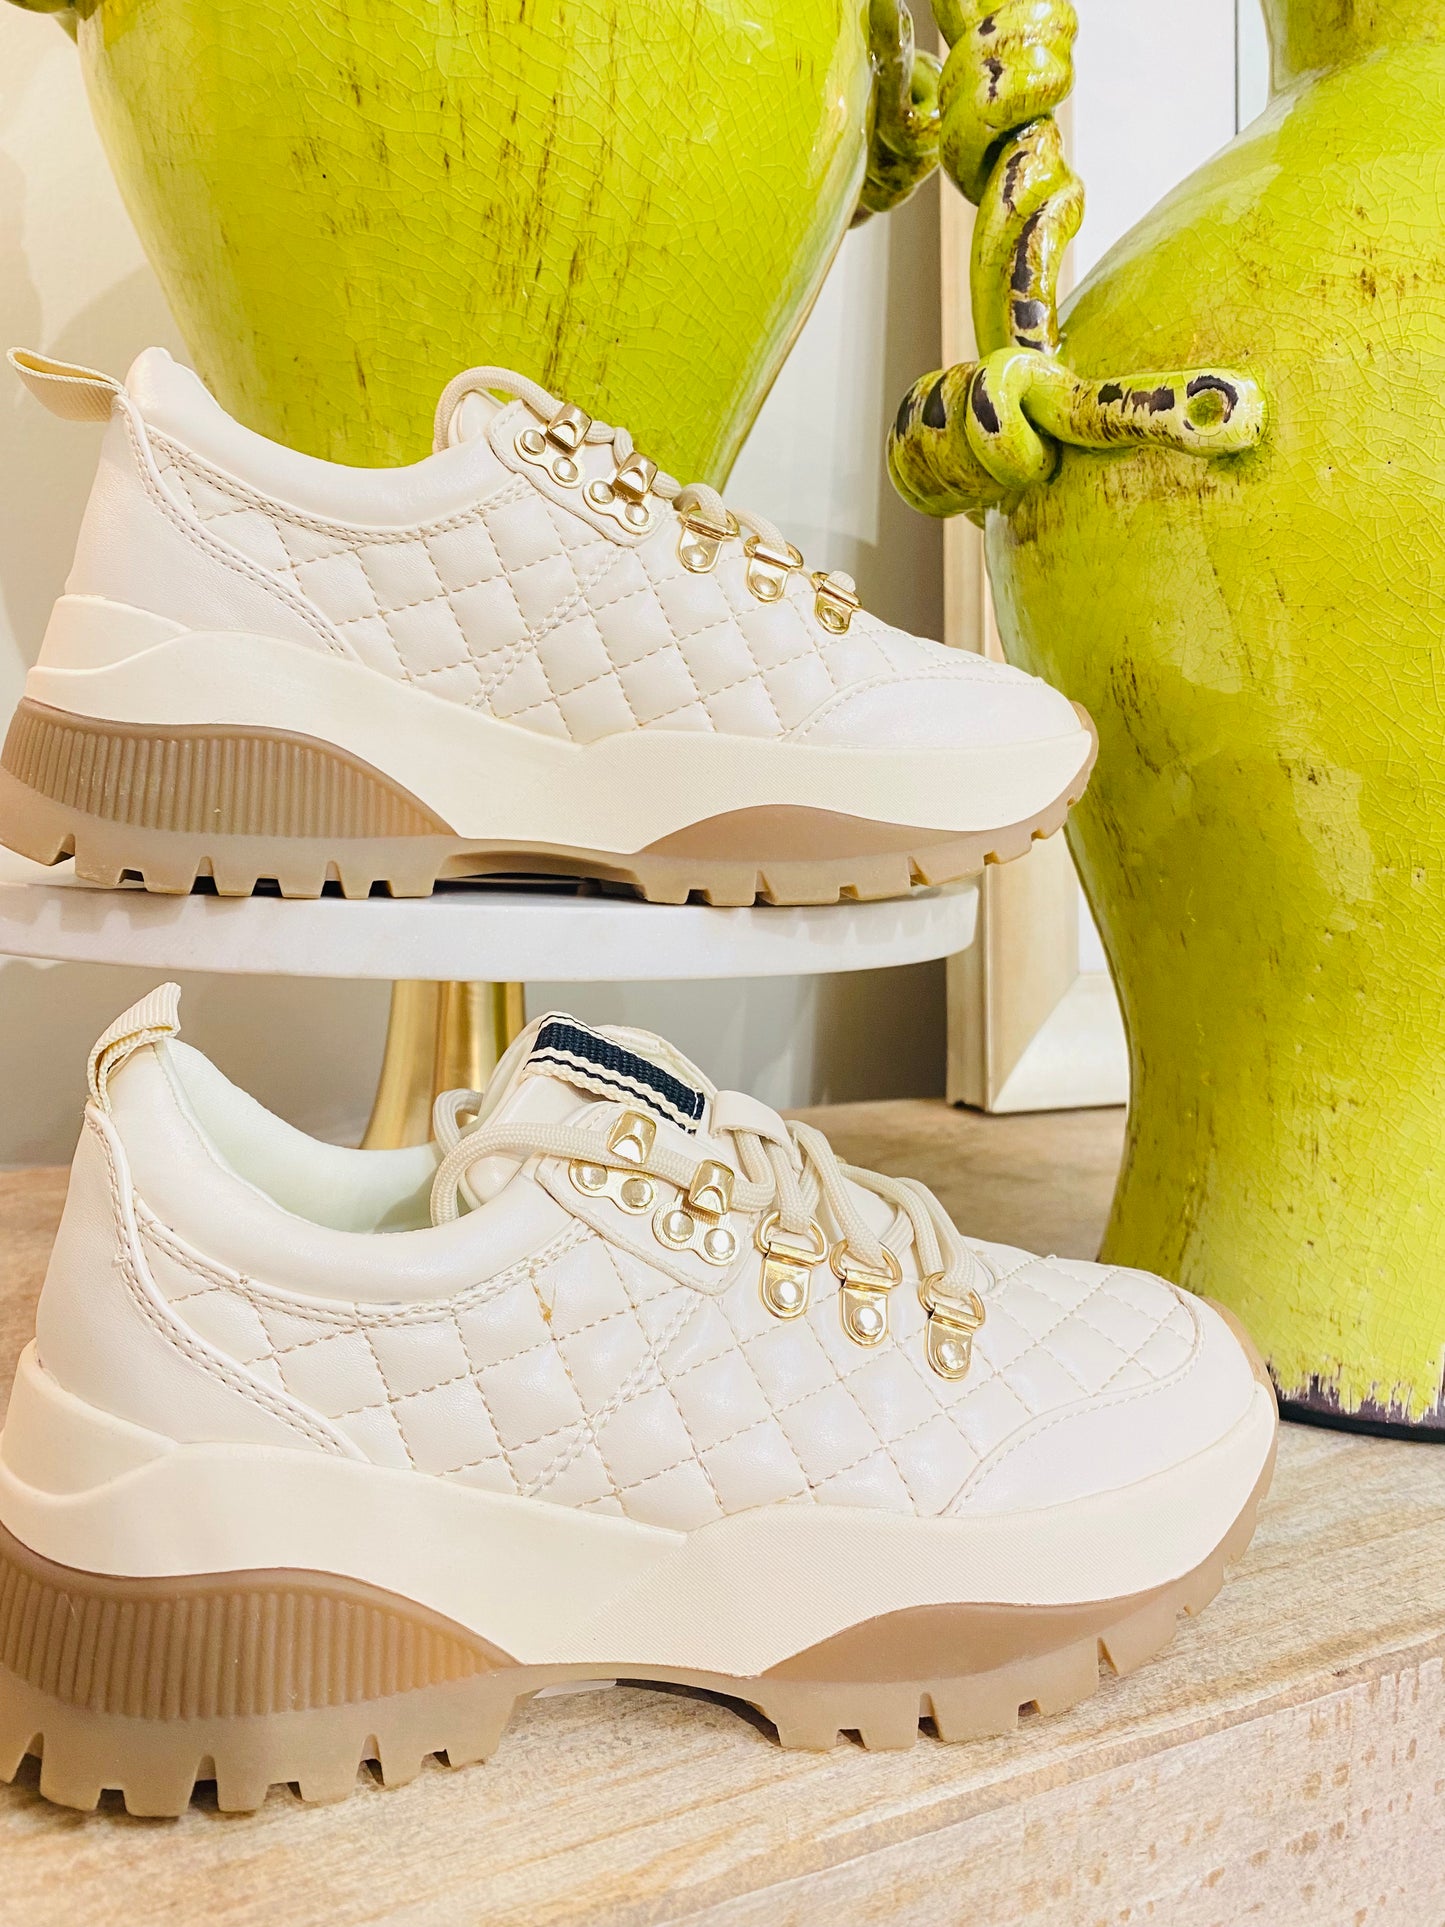 The Jade Quilted Cream Tennis Shoe/FINAL SALE